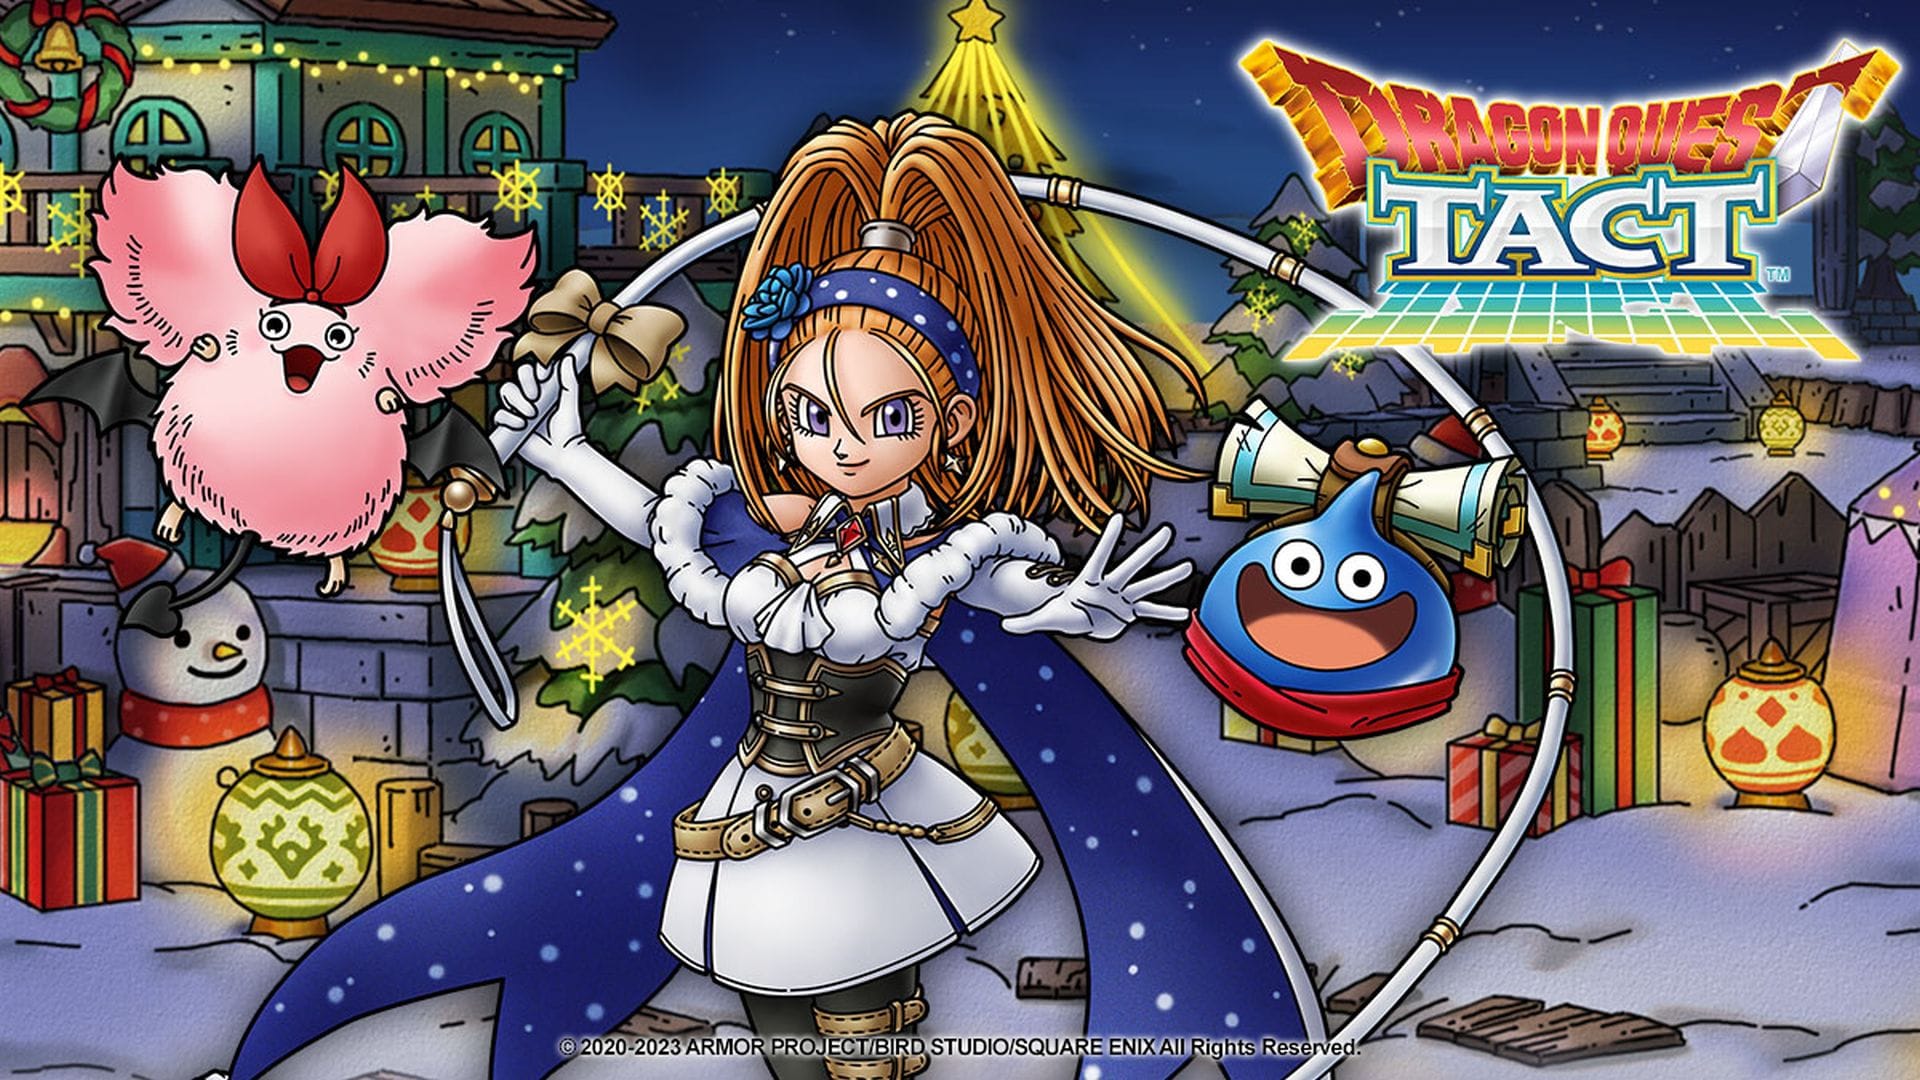 Dragon Quest Tact Shutting Down At Least in the West